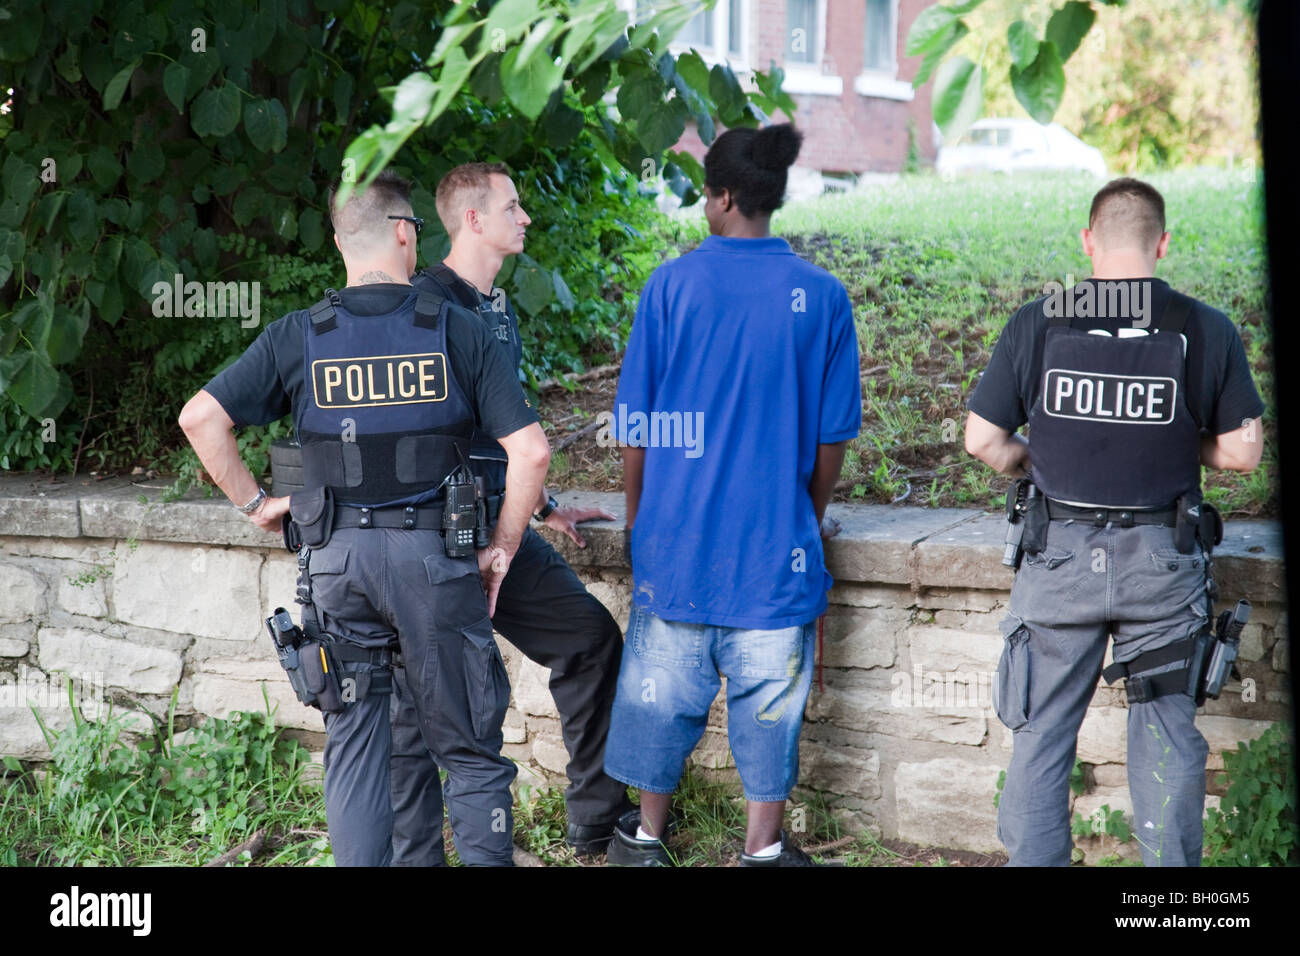 Police officers from tactical squad talking to suspect. Stock Photo